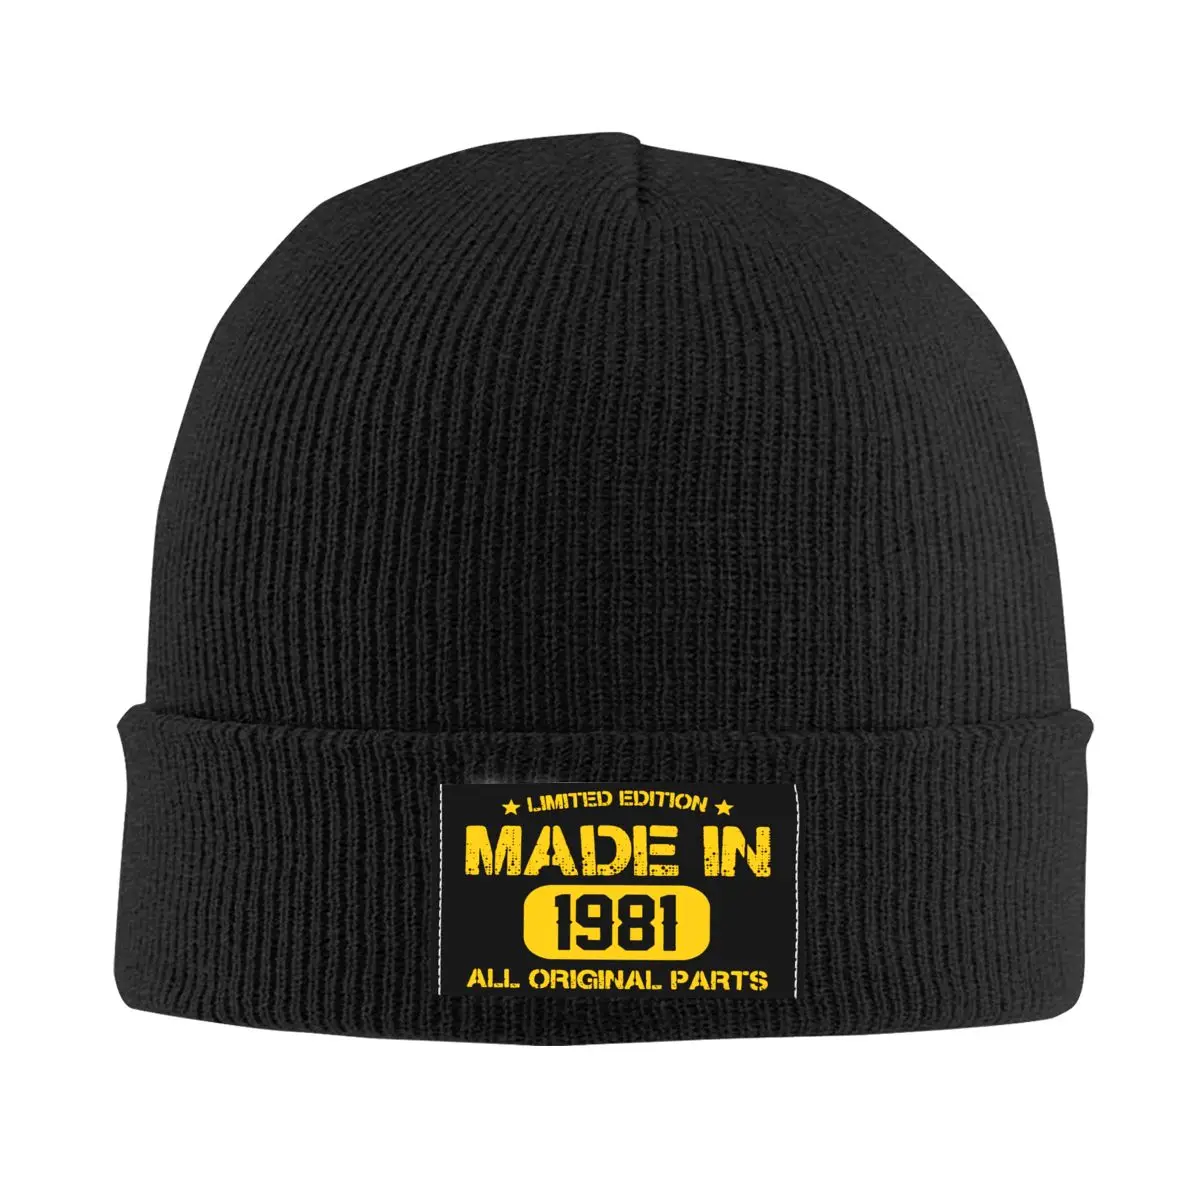 

40th Birthday Gift Ideas Made In 1981 Knitted Caps Women's Men's Beanies Autumn Winter Hats Warm Cap